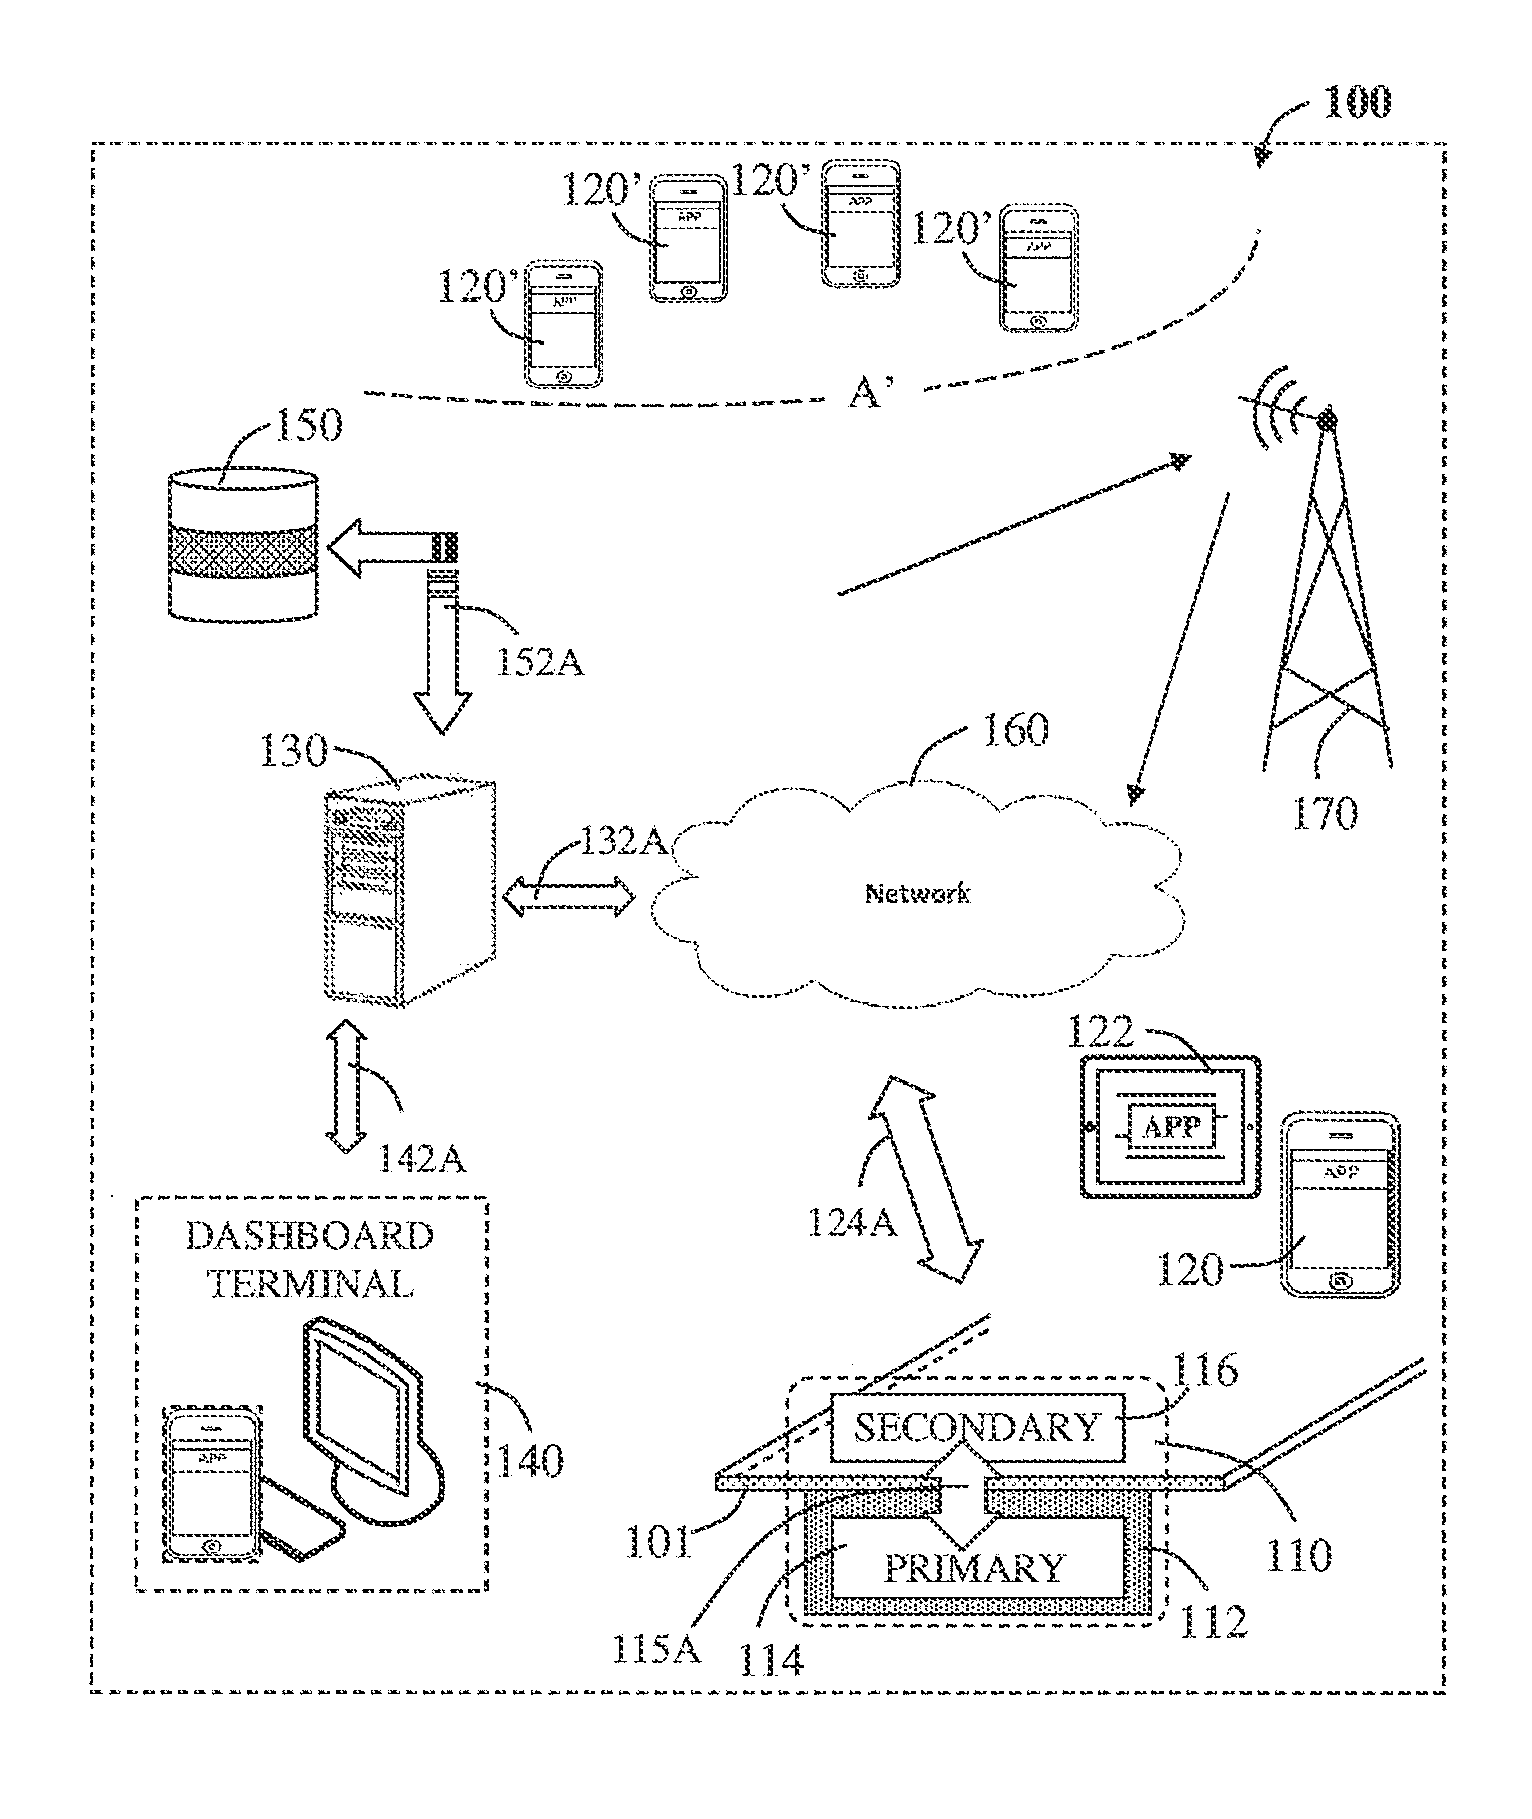 Systems and methods for managing a distributed wireless power transfer network for electrical devices